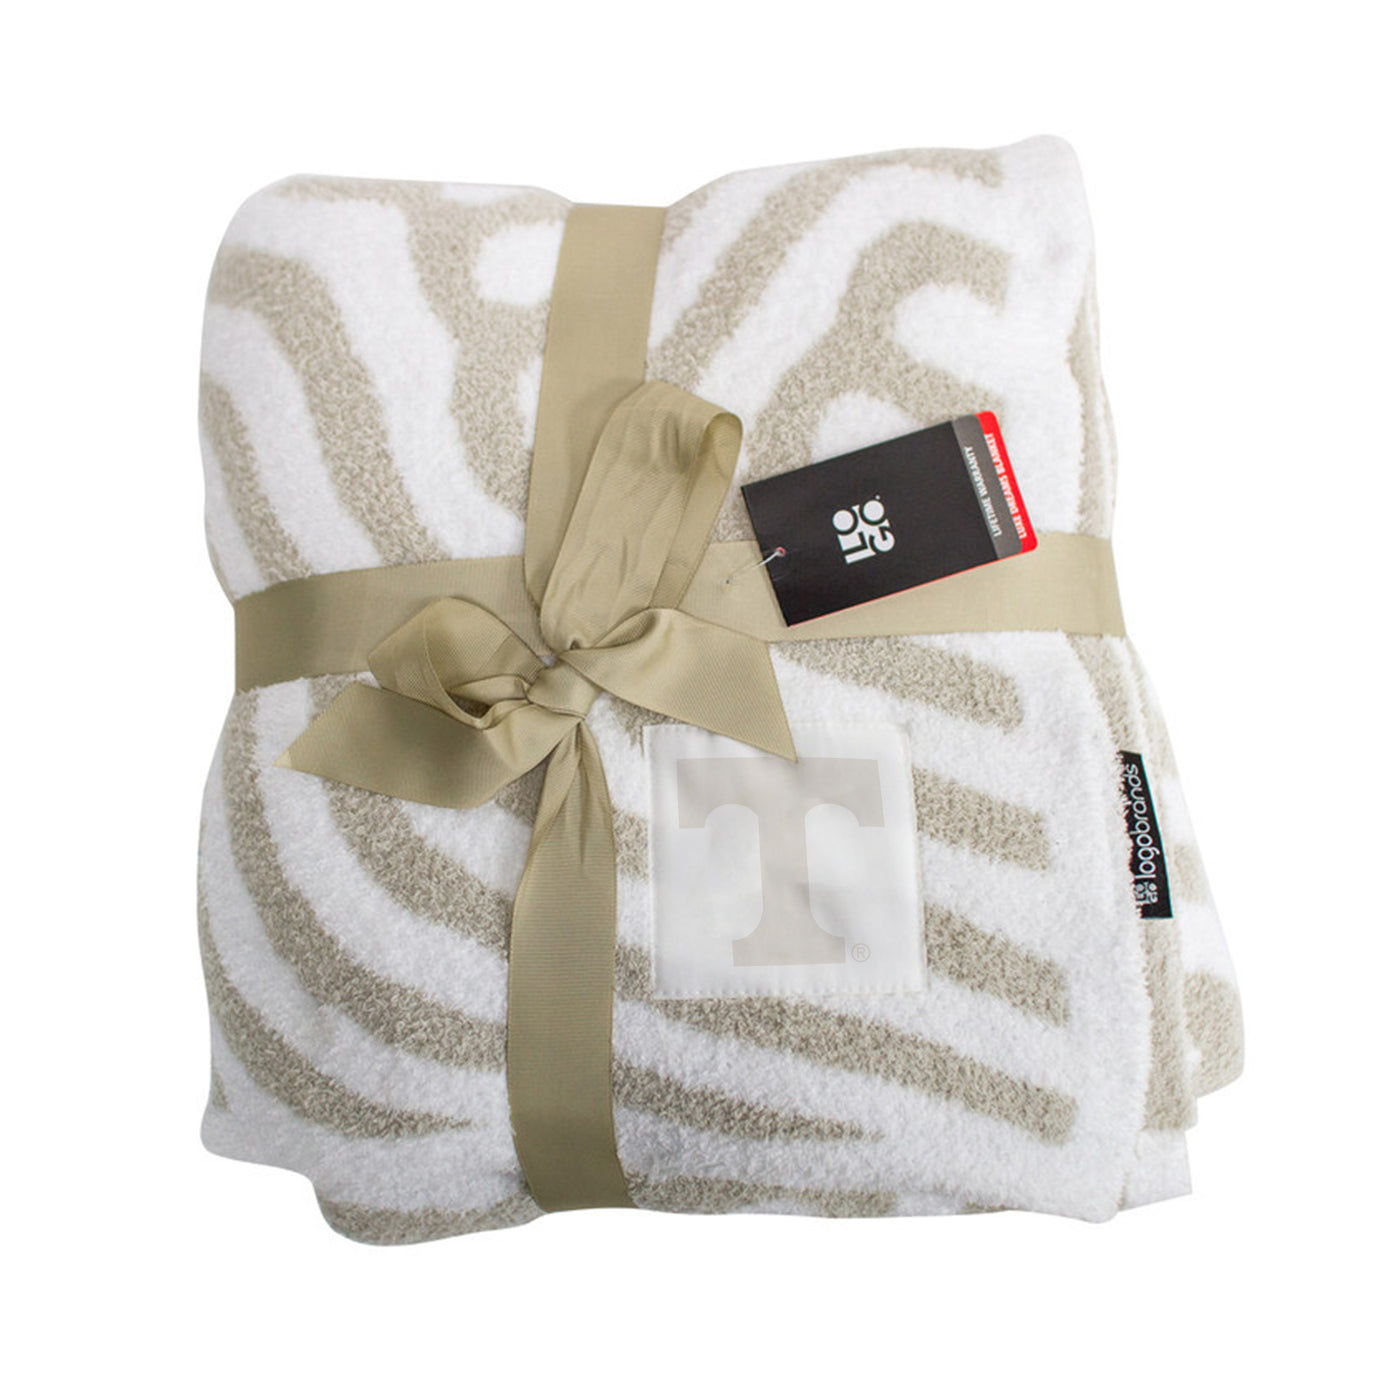 Tennessee Luxe Dreams Throw